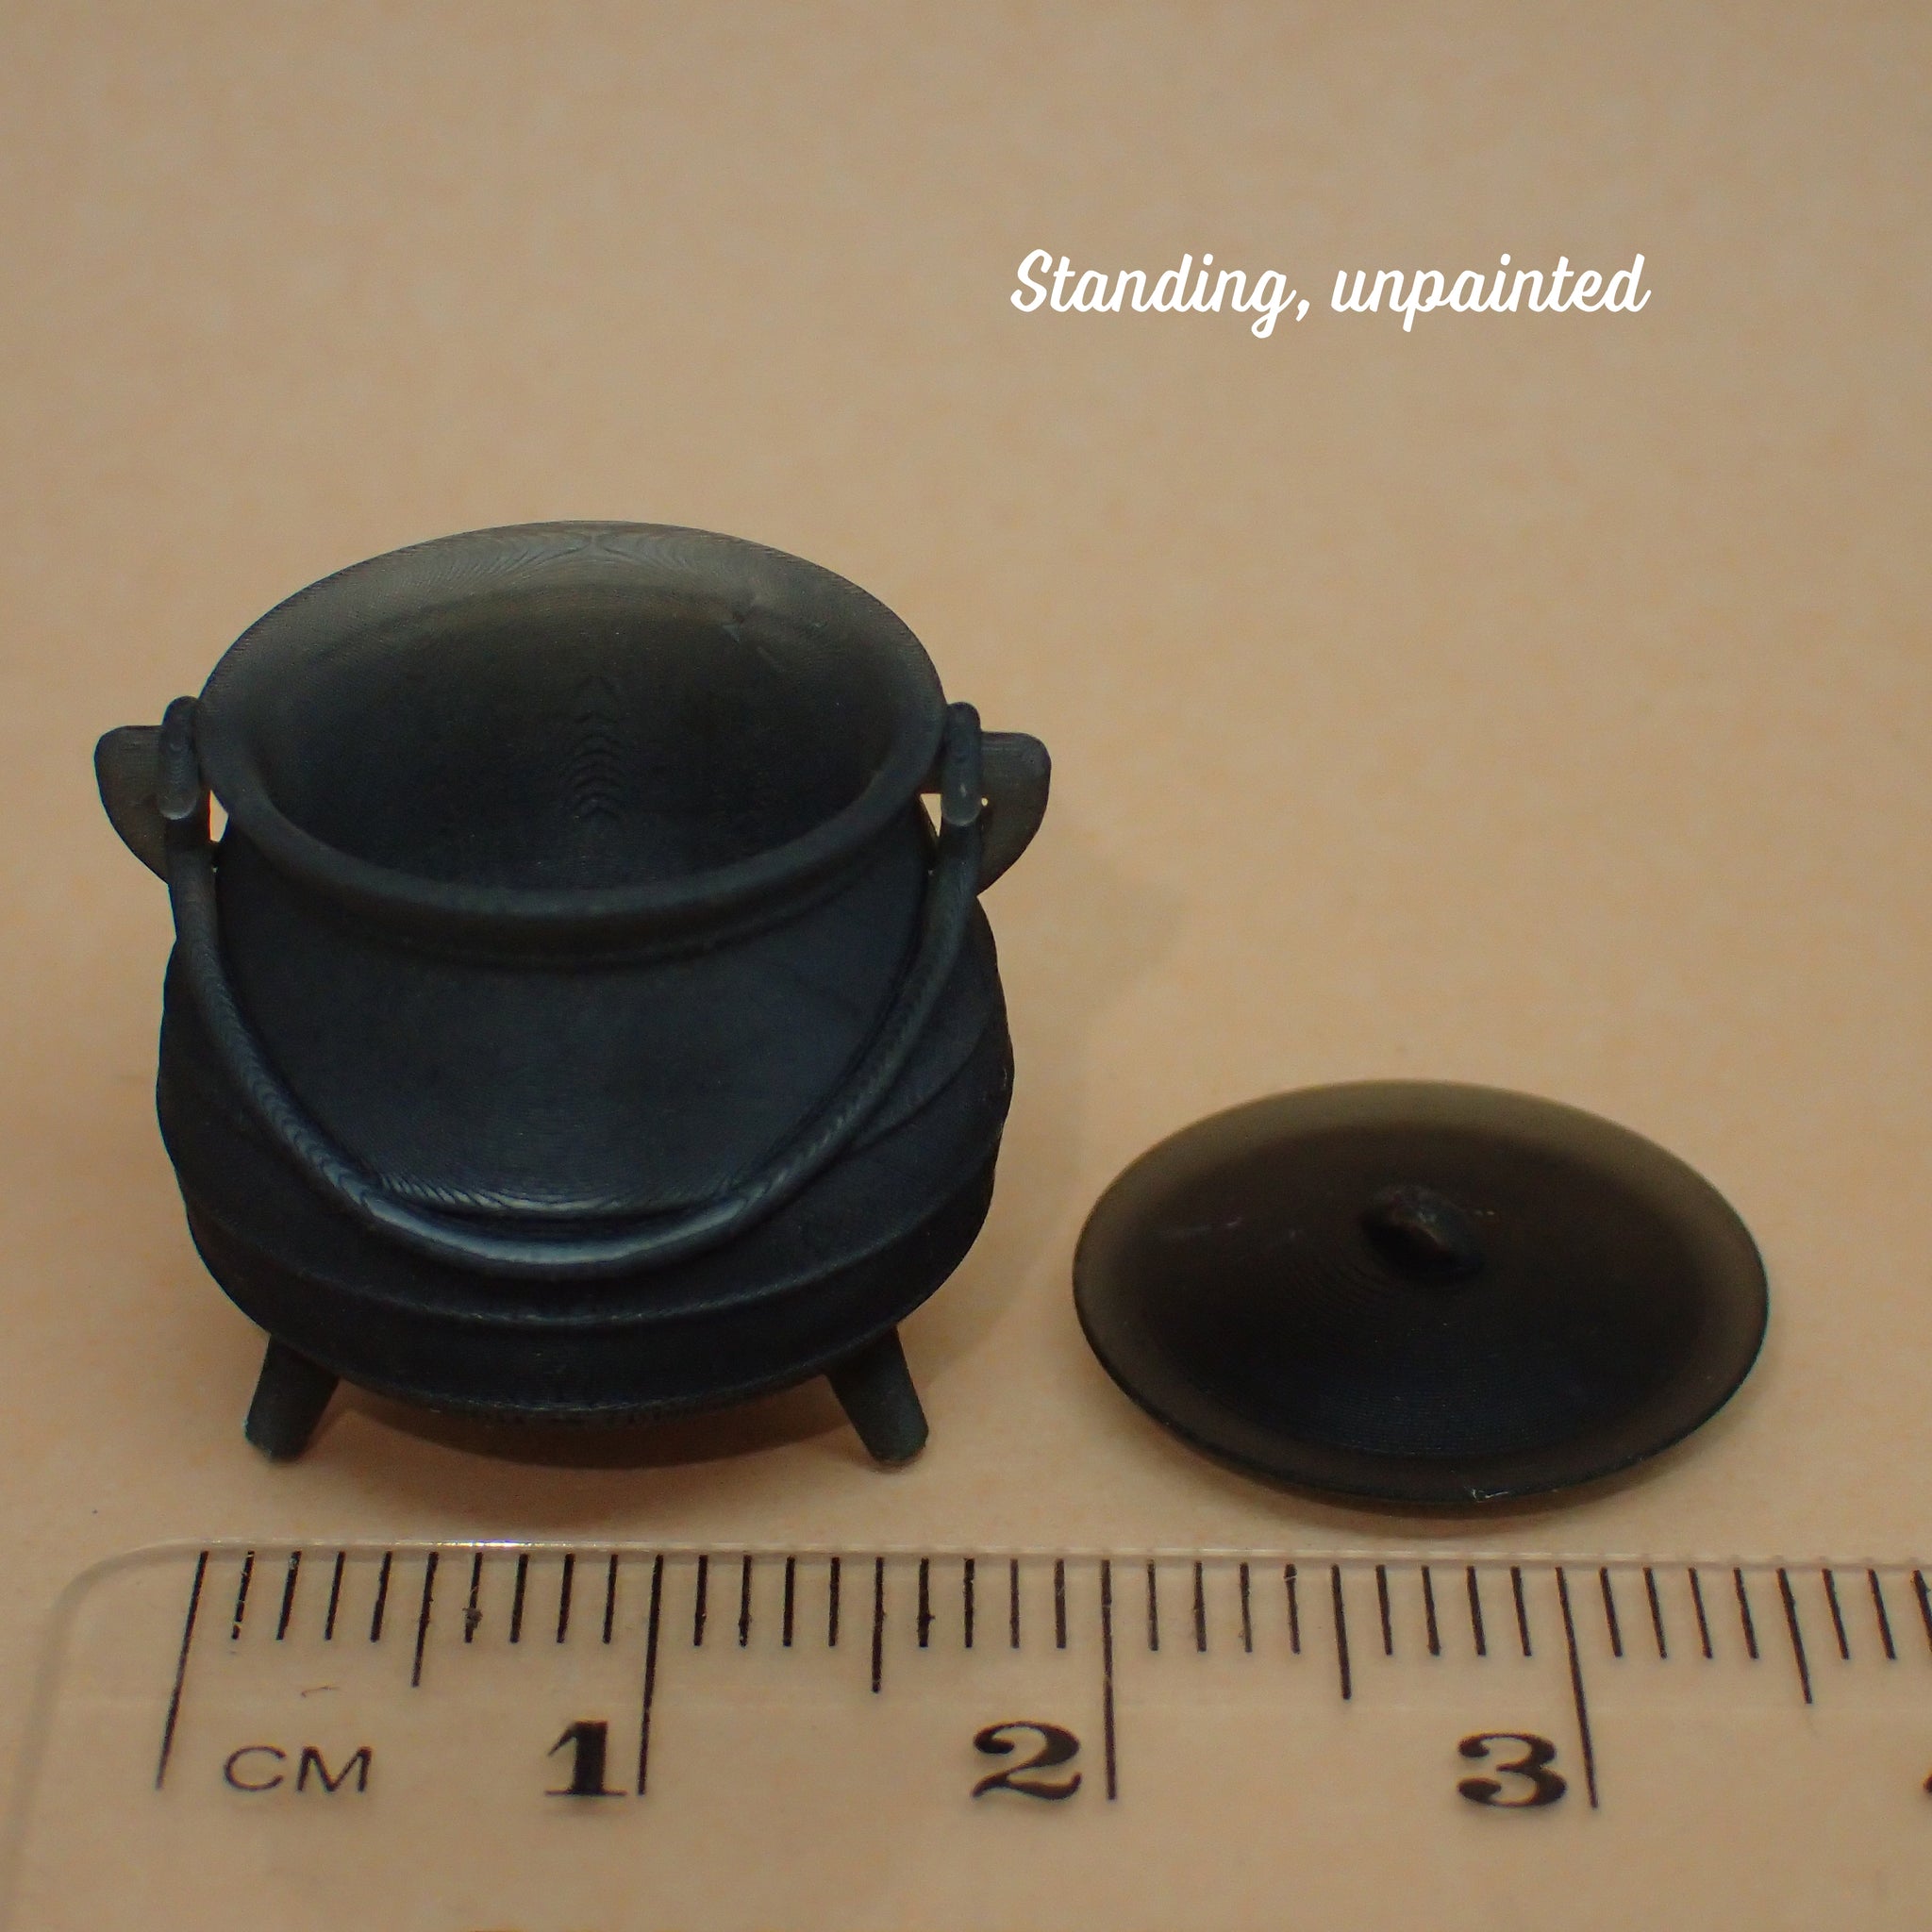 Cauldron with lid, 1/24th scale